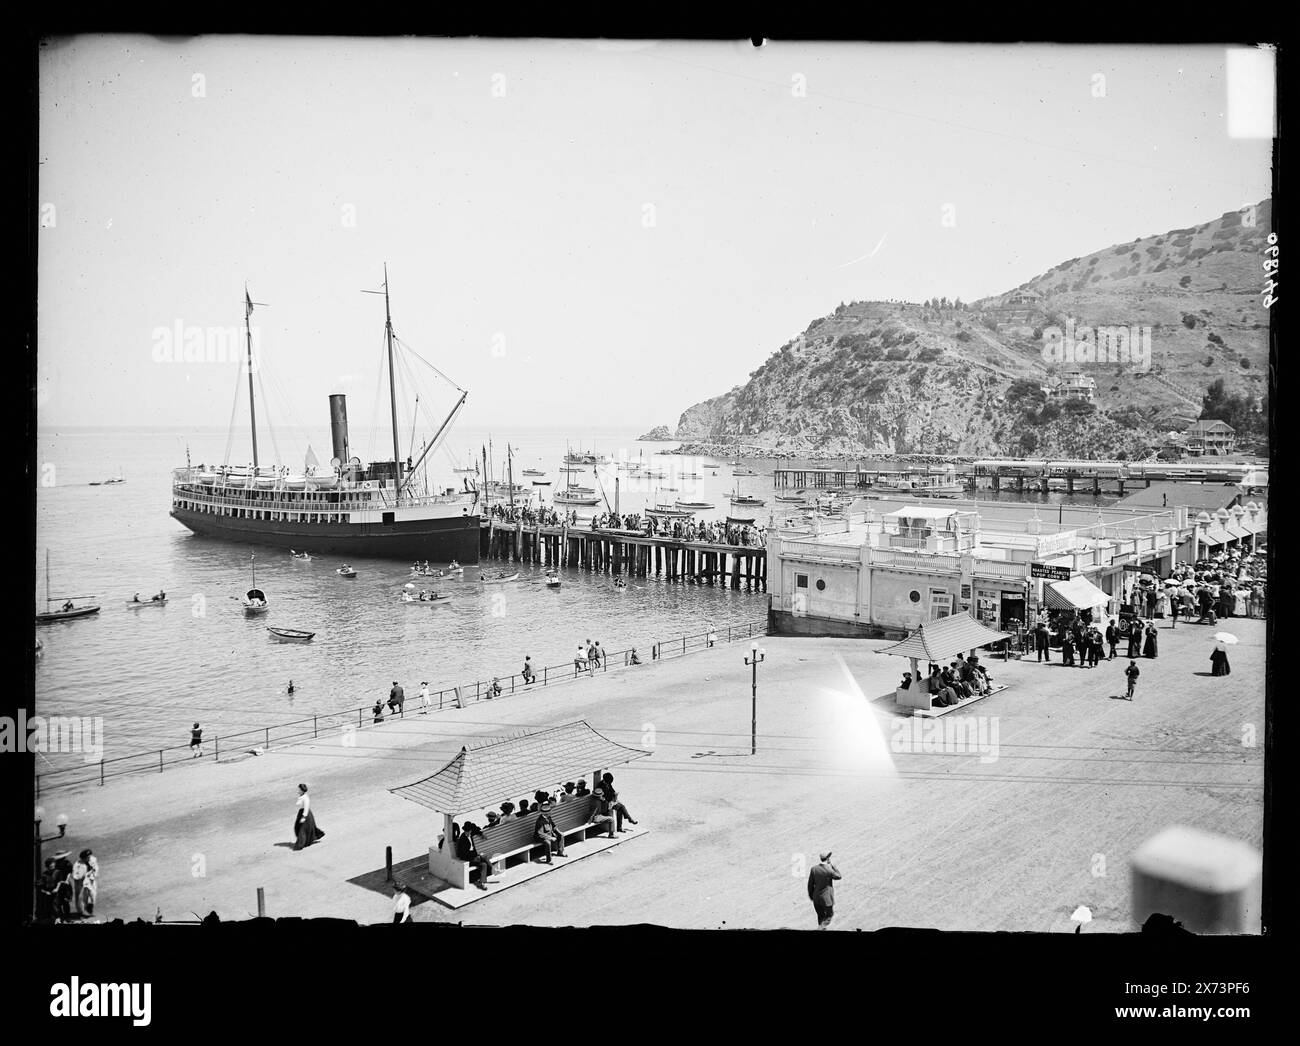 Steamship at pier by boardwalk, Avalon, Catalina Island, Calif., Title devised by cataloger., '4506' on negative., Detroit Publishing Co. no. 068149., Gift; State Historical Society of Colorado; 1949,  Ships. , Harbors. , Boardwalks. , Piers & wharves. , United States, California, Santa Catalina Island. , United States, California, Avalon. Stock Photo